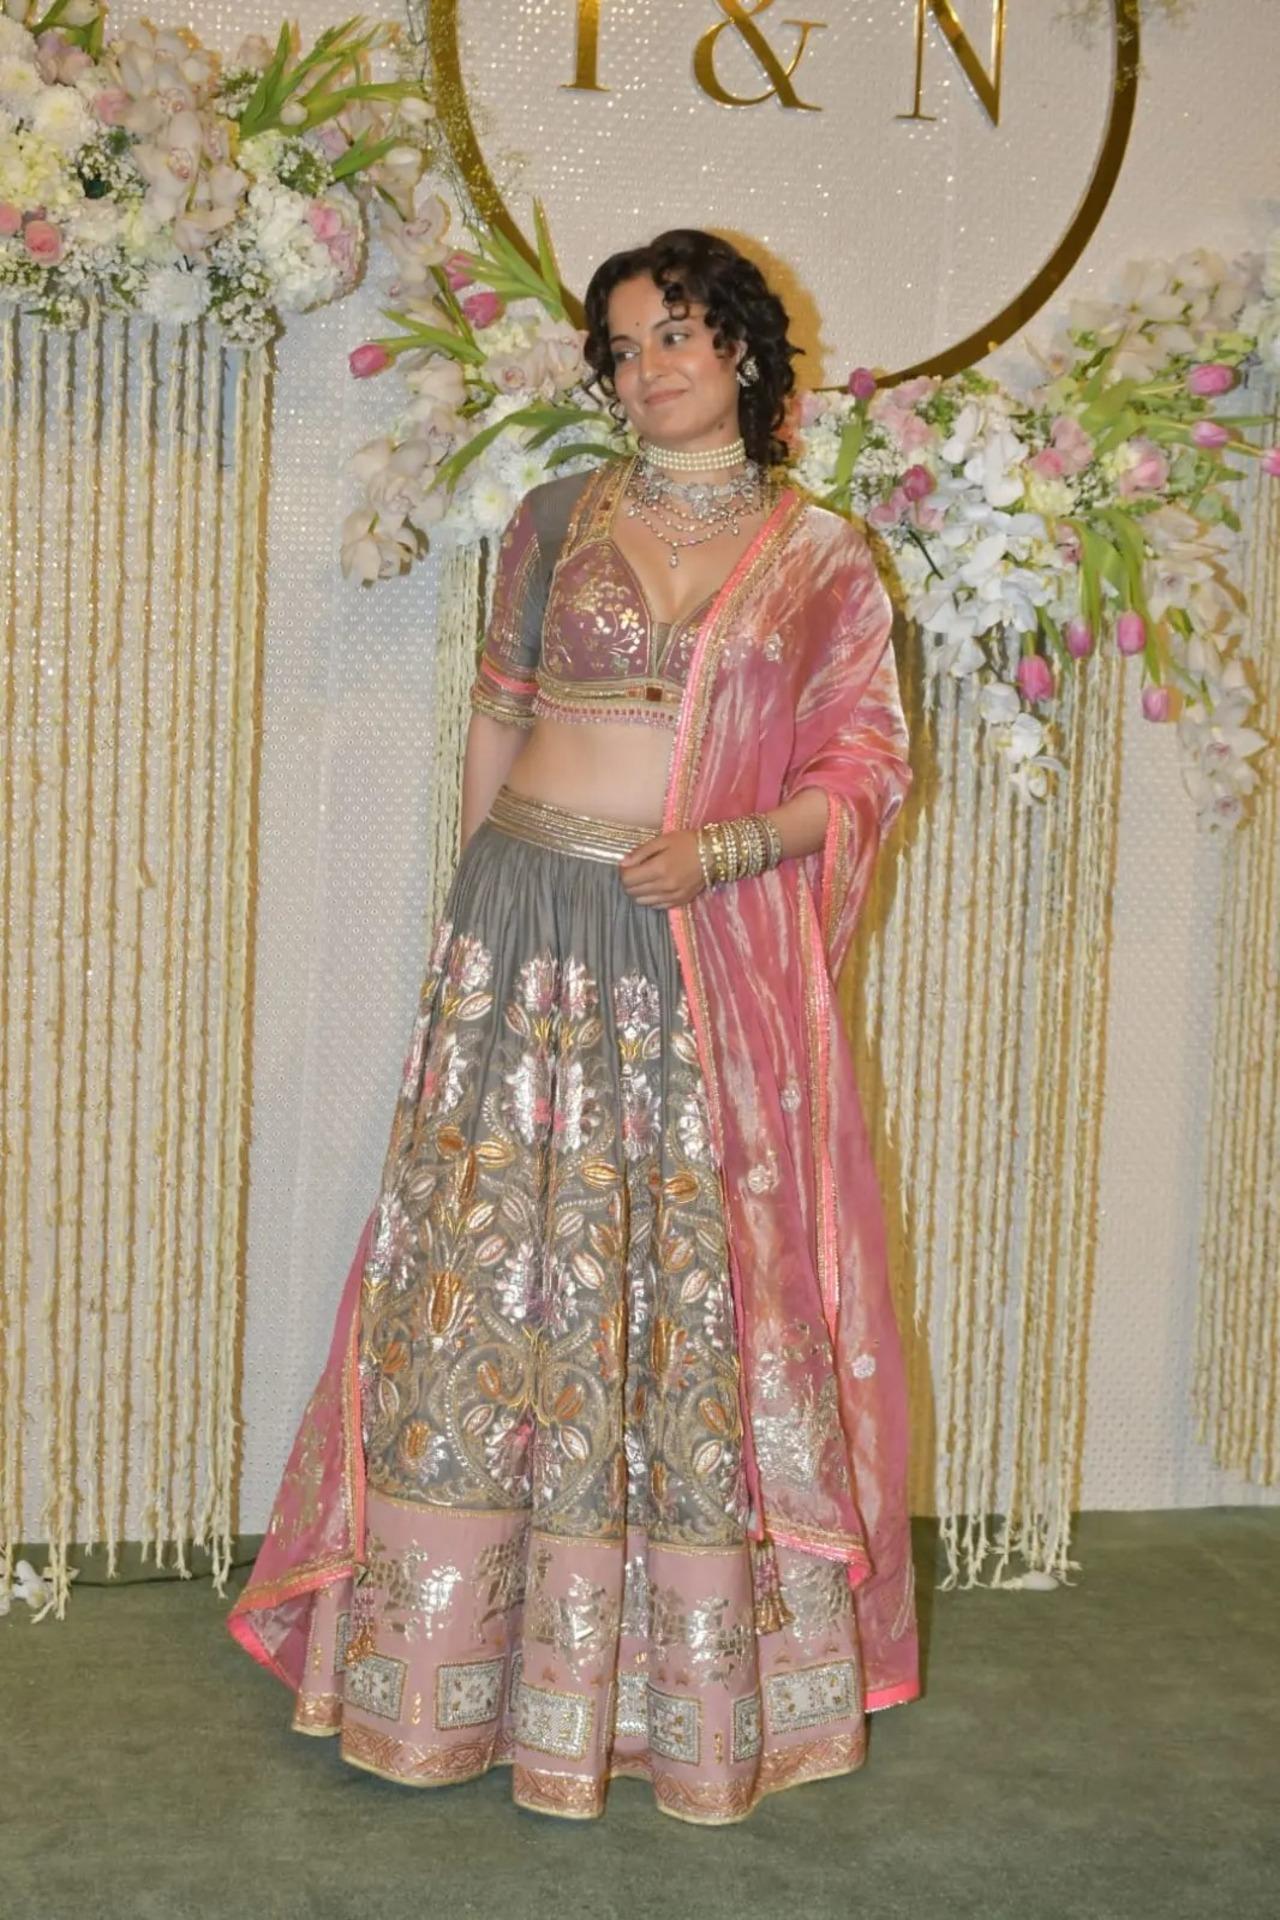 Kangana Ranaut looked beautiful in a heavy grey and pink lehenga. She tied her hair in a loose bun and let her curls frame her face